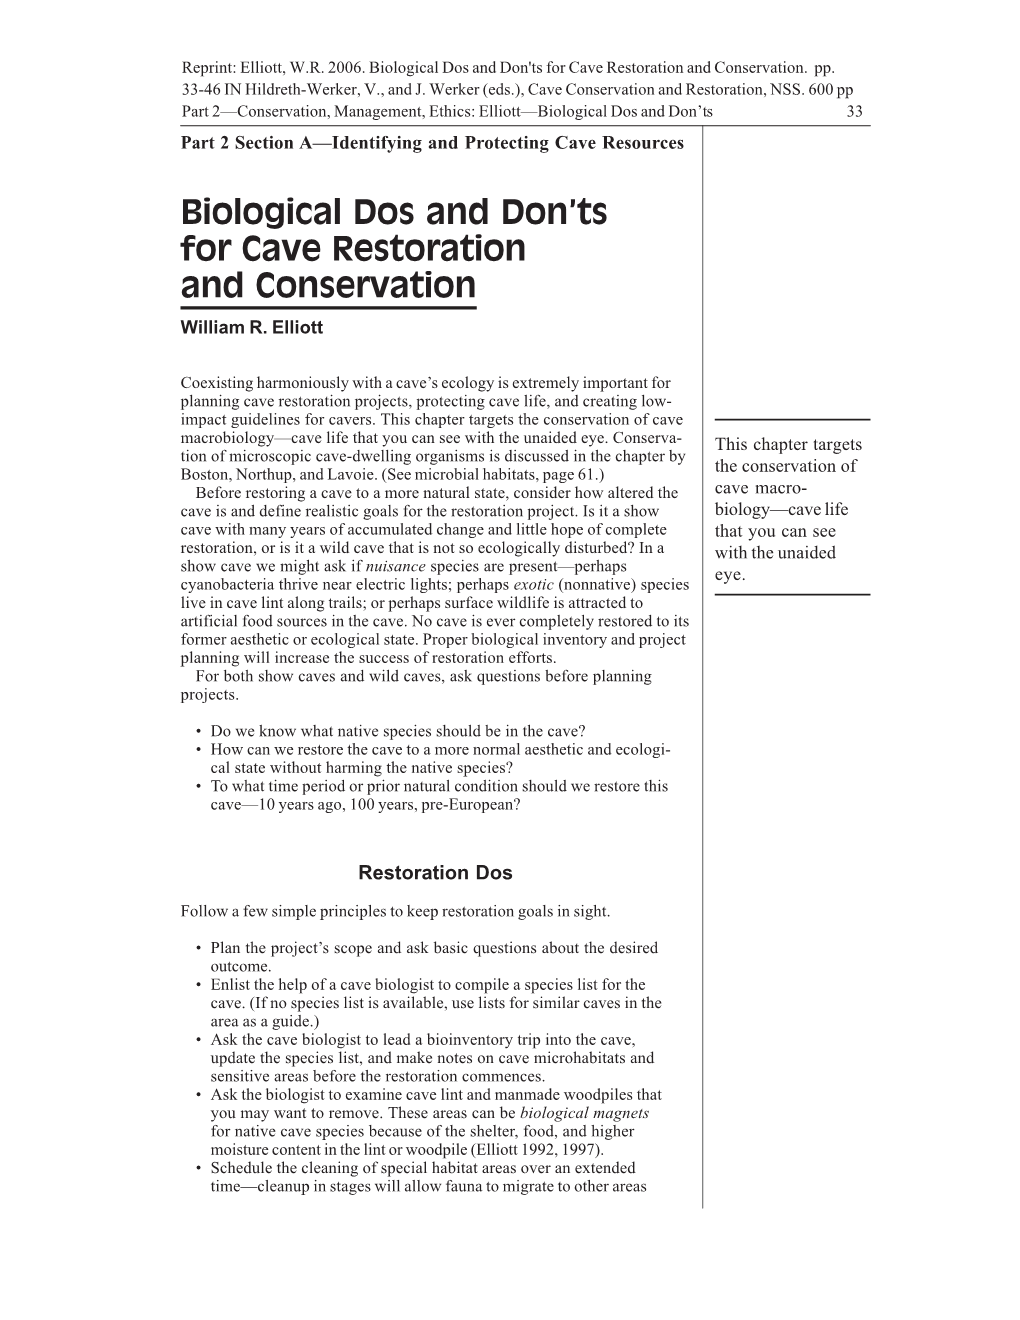 Biological Dos and Don'ts for Cave Restoration and Conservation